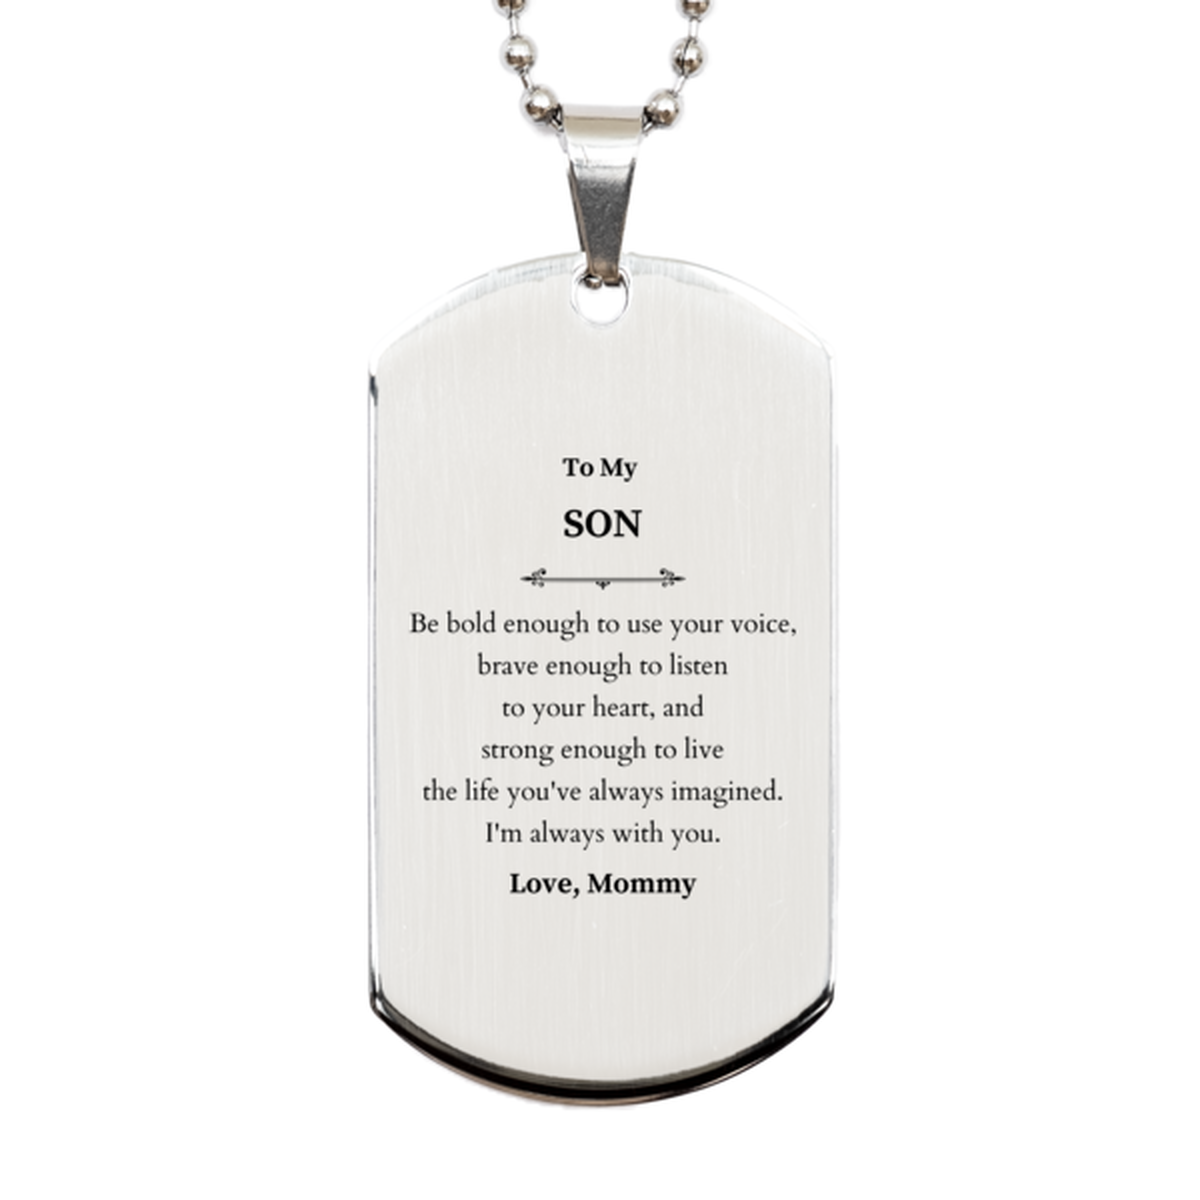 Keepsake Son Silver Dog Tag Gift Idea Graduation Christmas Birthday Son from Mommy, Son Be bold enough to use your voice, brave enough to listen to your heart. Love, Mommy